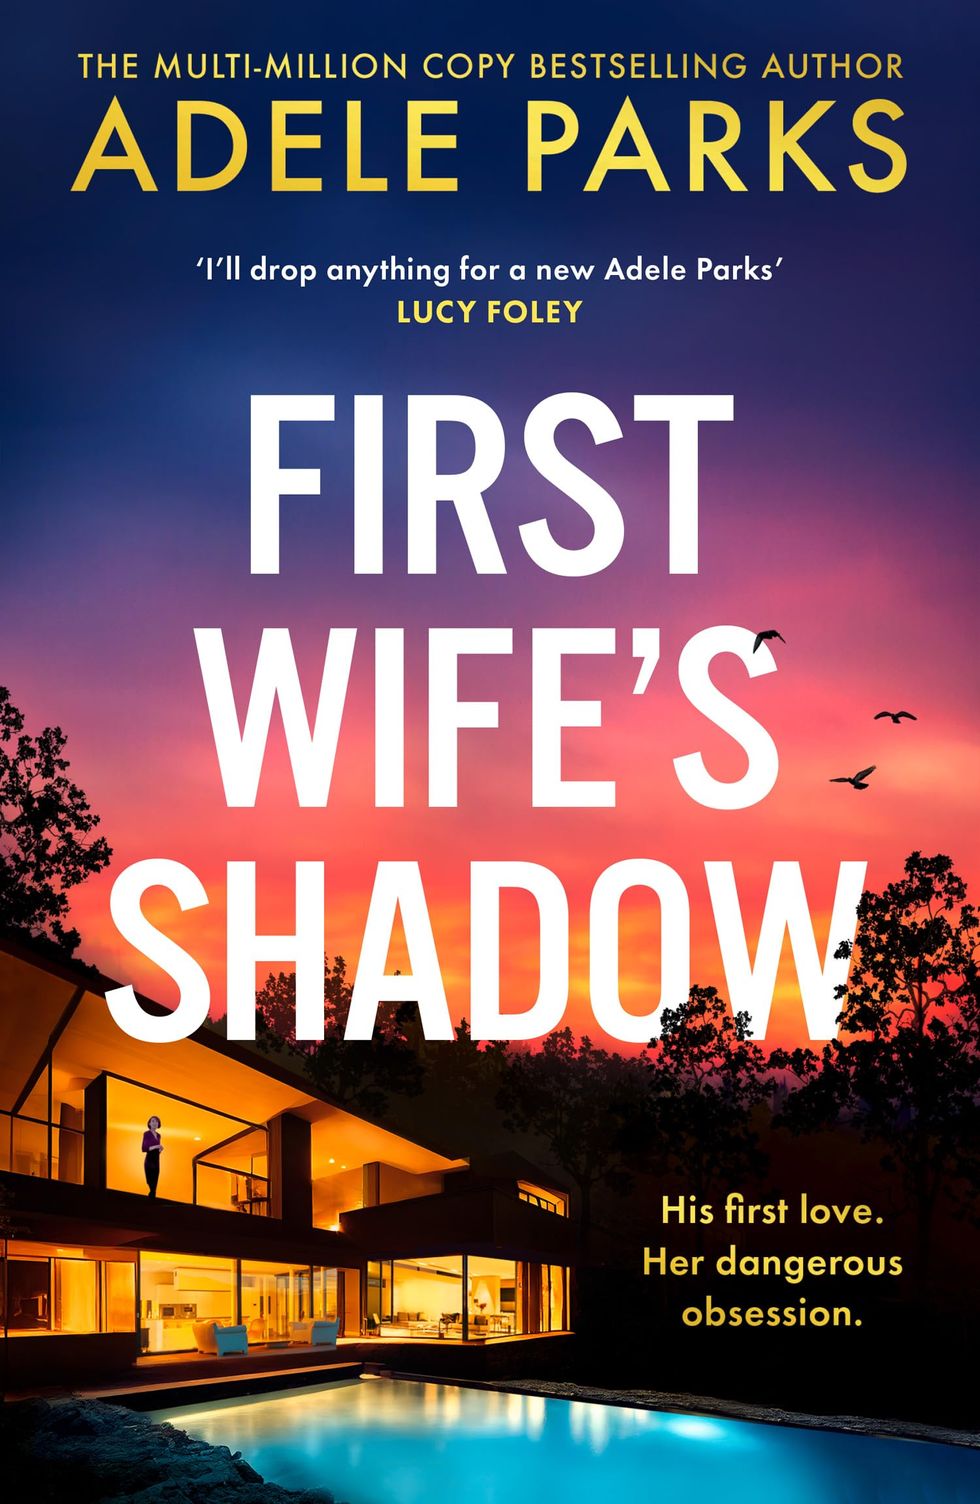 First Wife's Shadow by Adele Parks